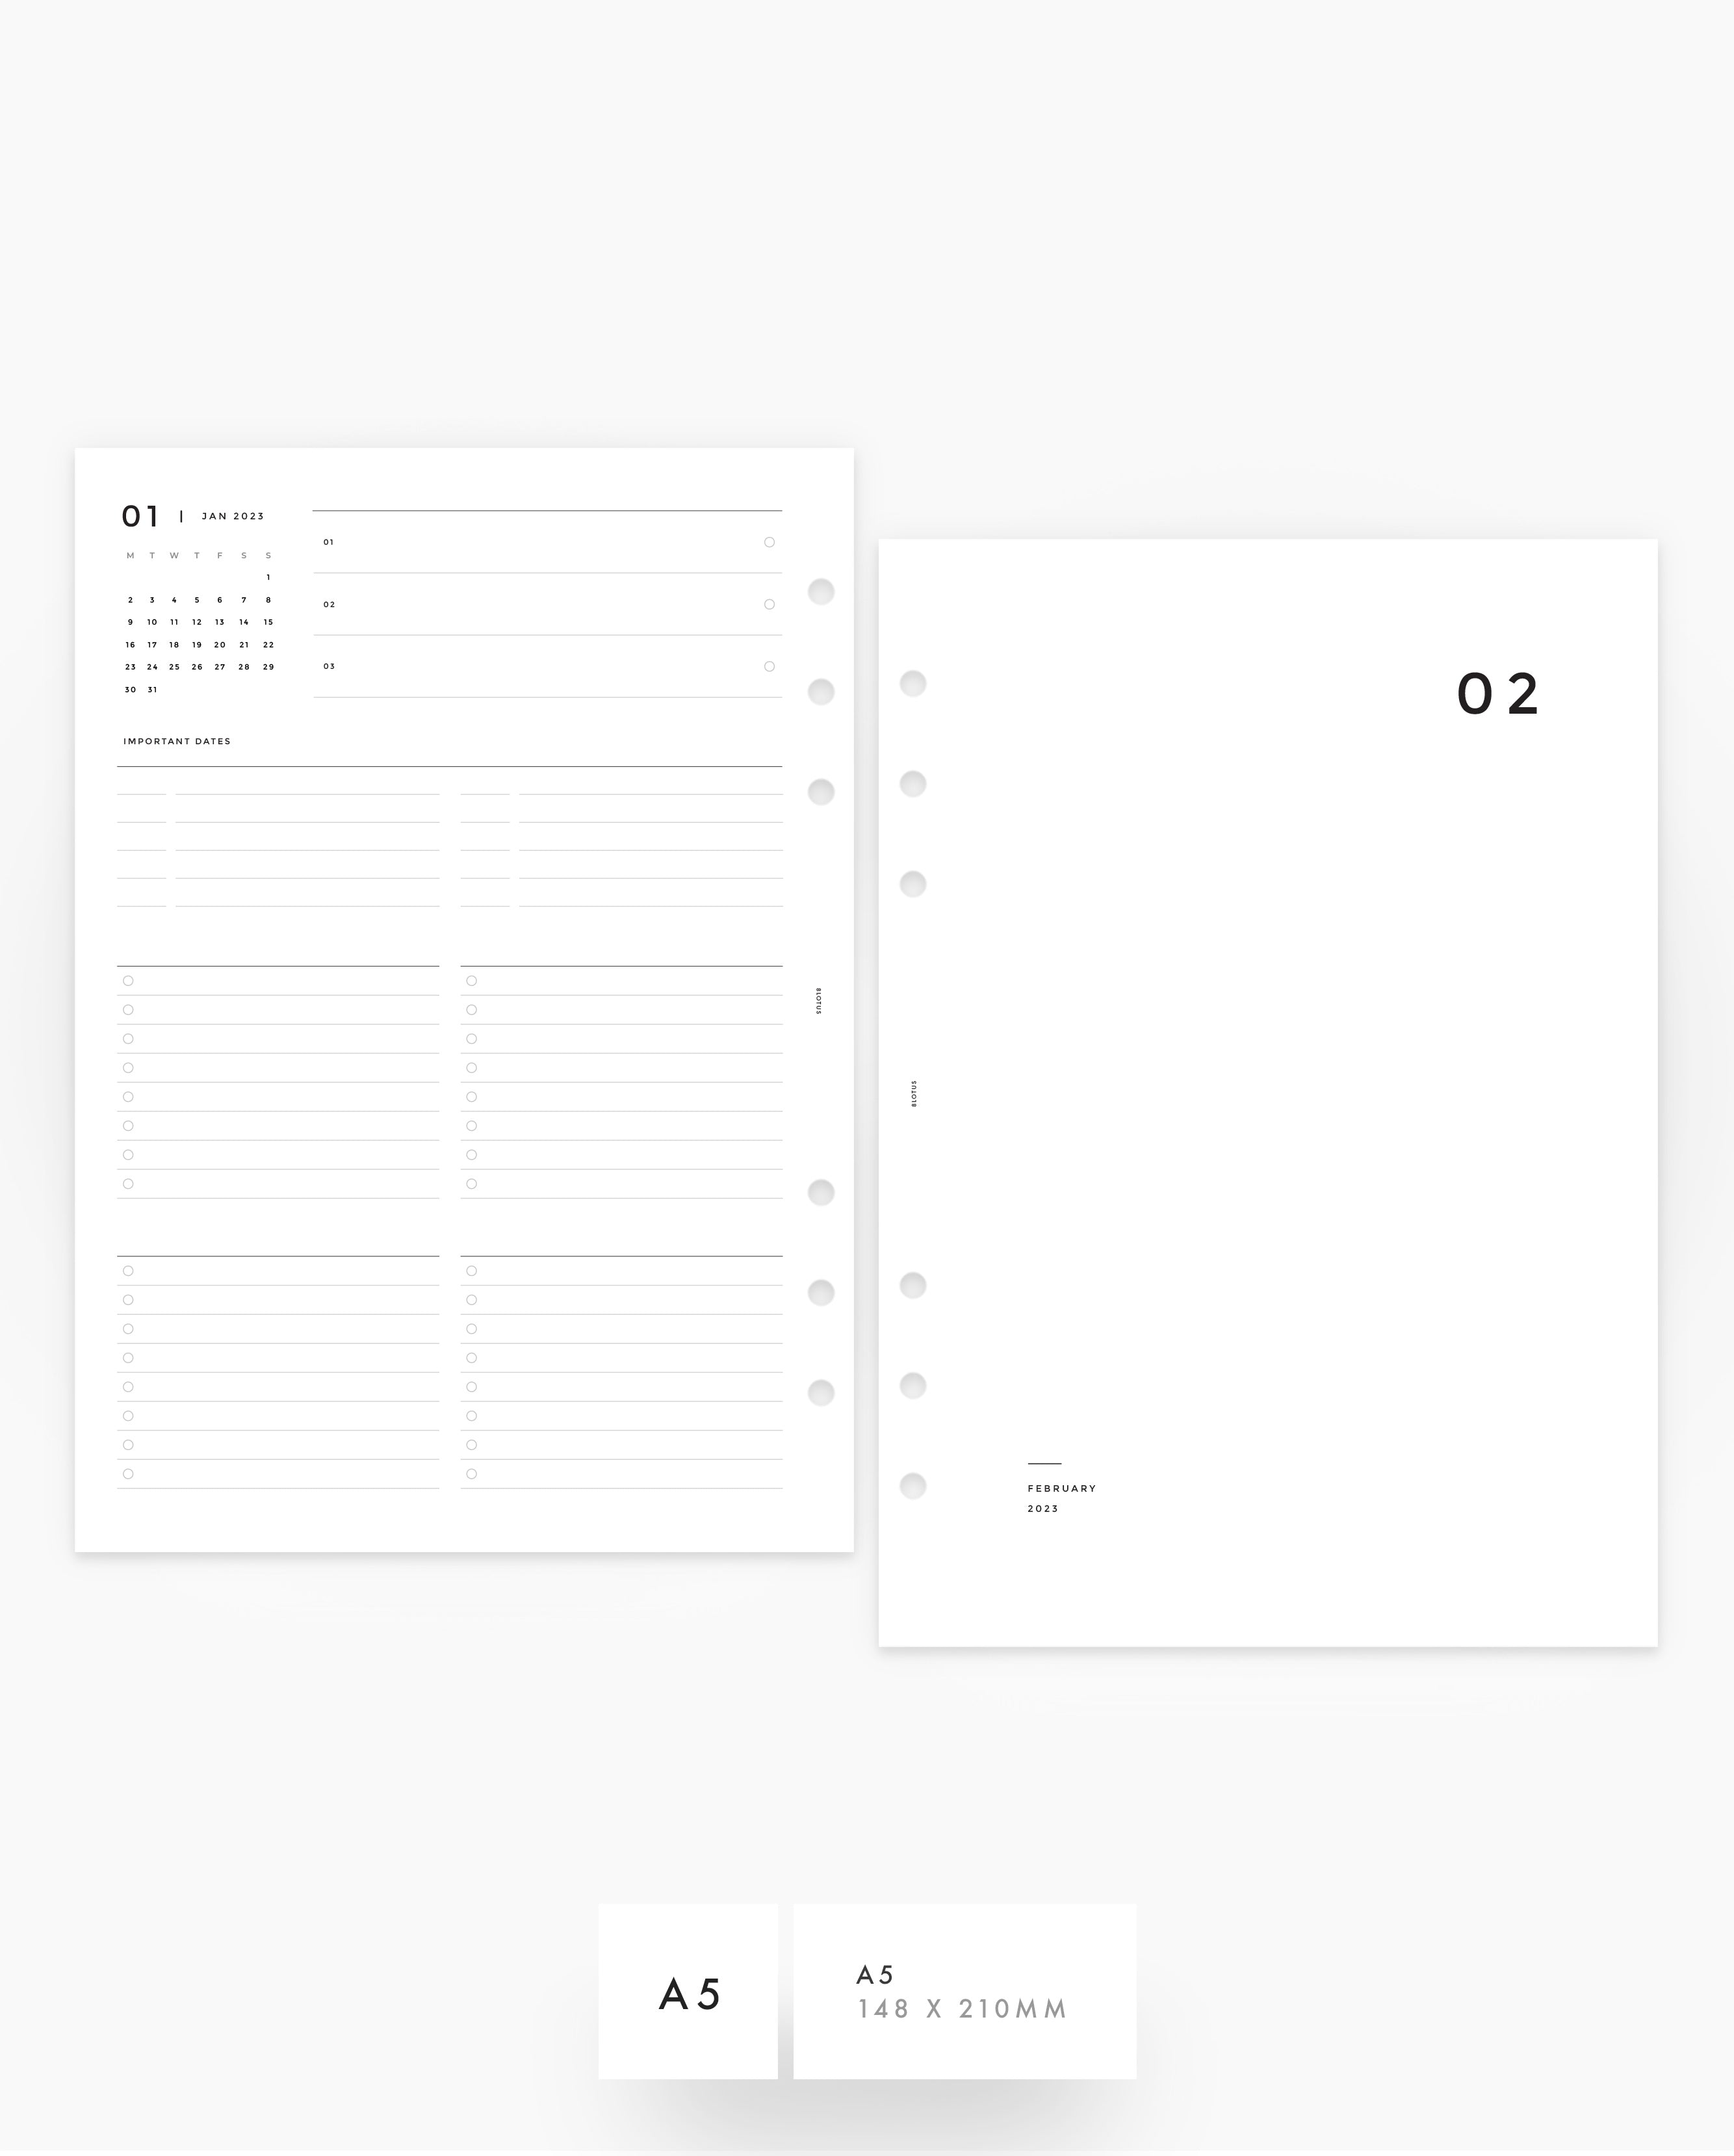 MN016 - 2023 MONTHLY PLANNER - MO4P - PDF